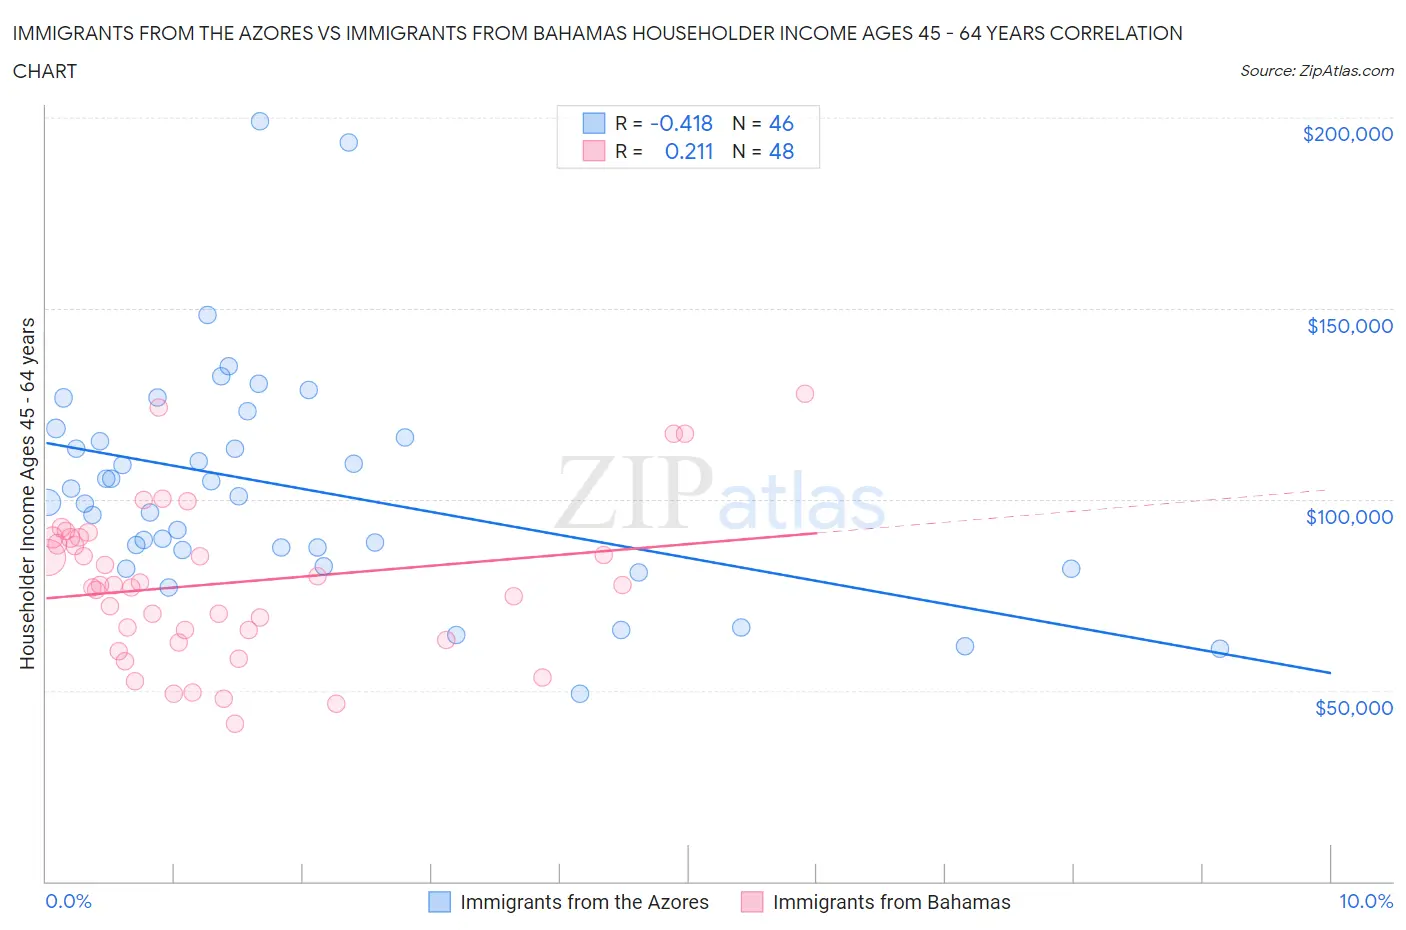 Immigrants from the Azores vs Immigrants from Bahamas Householder Income Ages 45 - 64 years